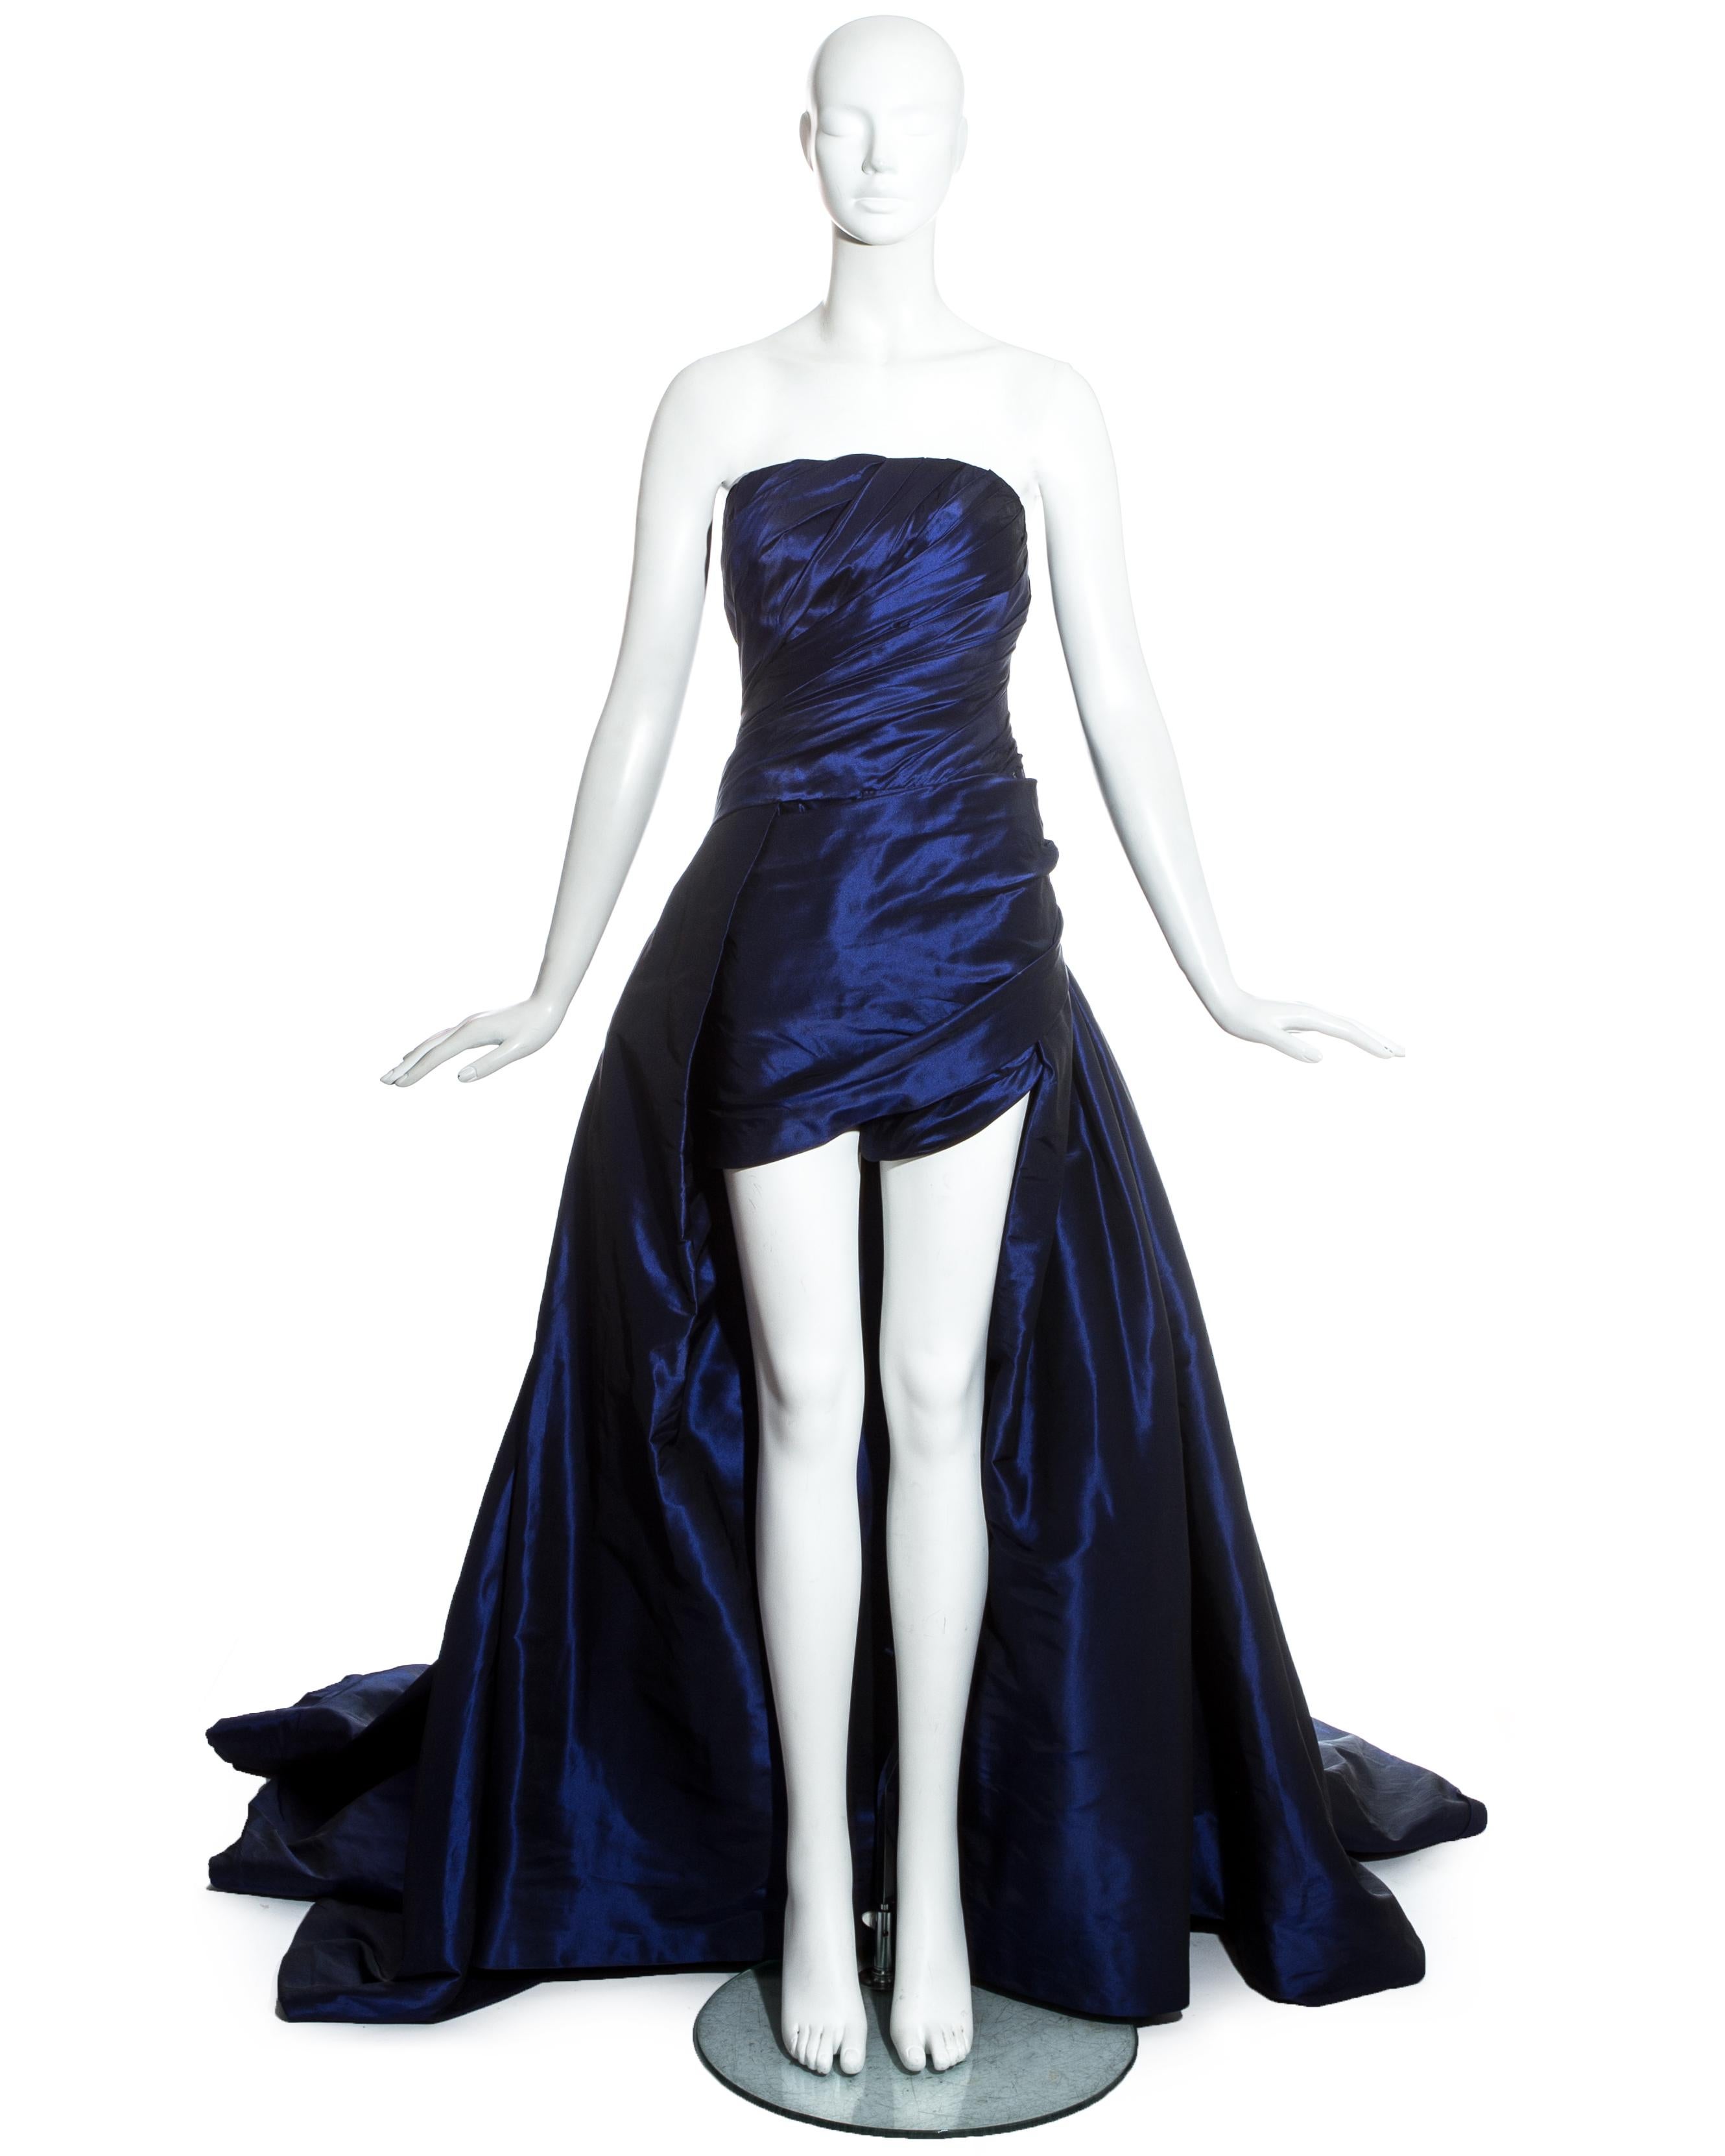 Jean-Louis Scherrer Haute Couture, blue taffeta evening gown with dramatic sweeping train, ruched bodice and internal playsuit with boning.

Spring-Summer 1994
